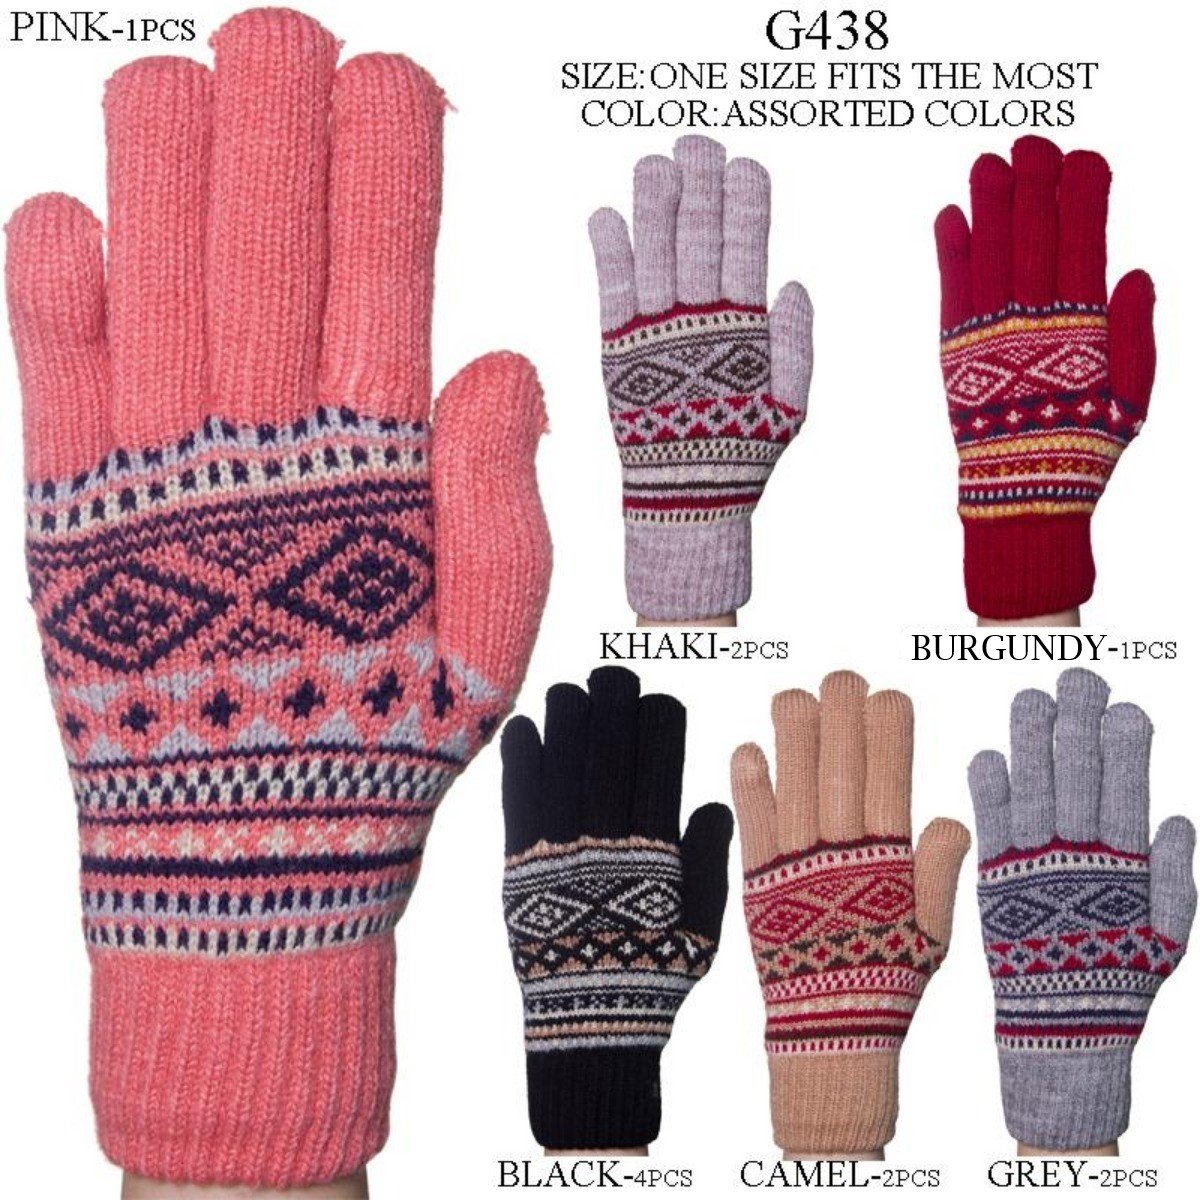 Mixed Print Knitted Gloves W/ Sherpa Lining - 12Pc Set